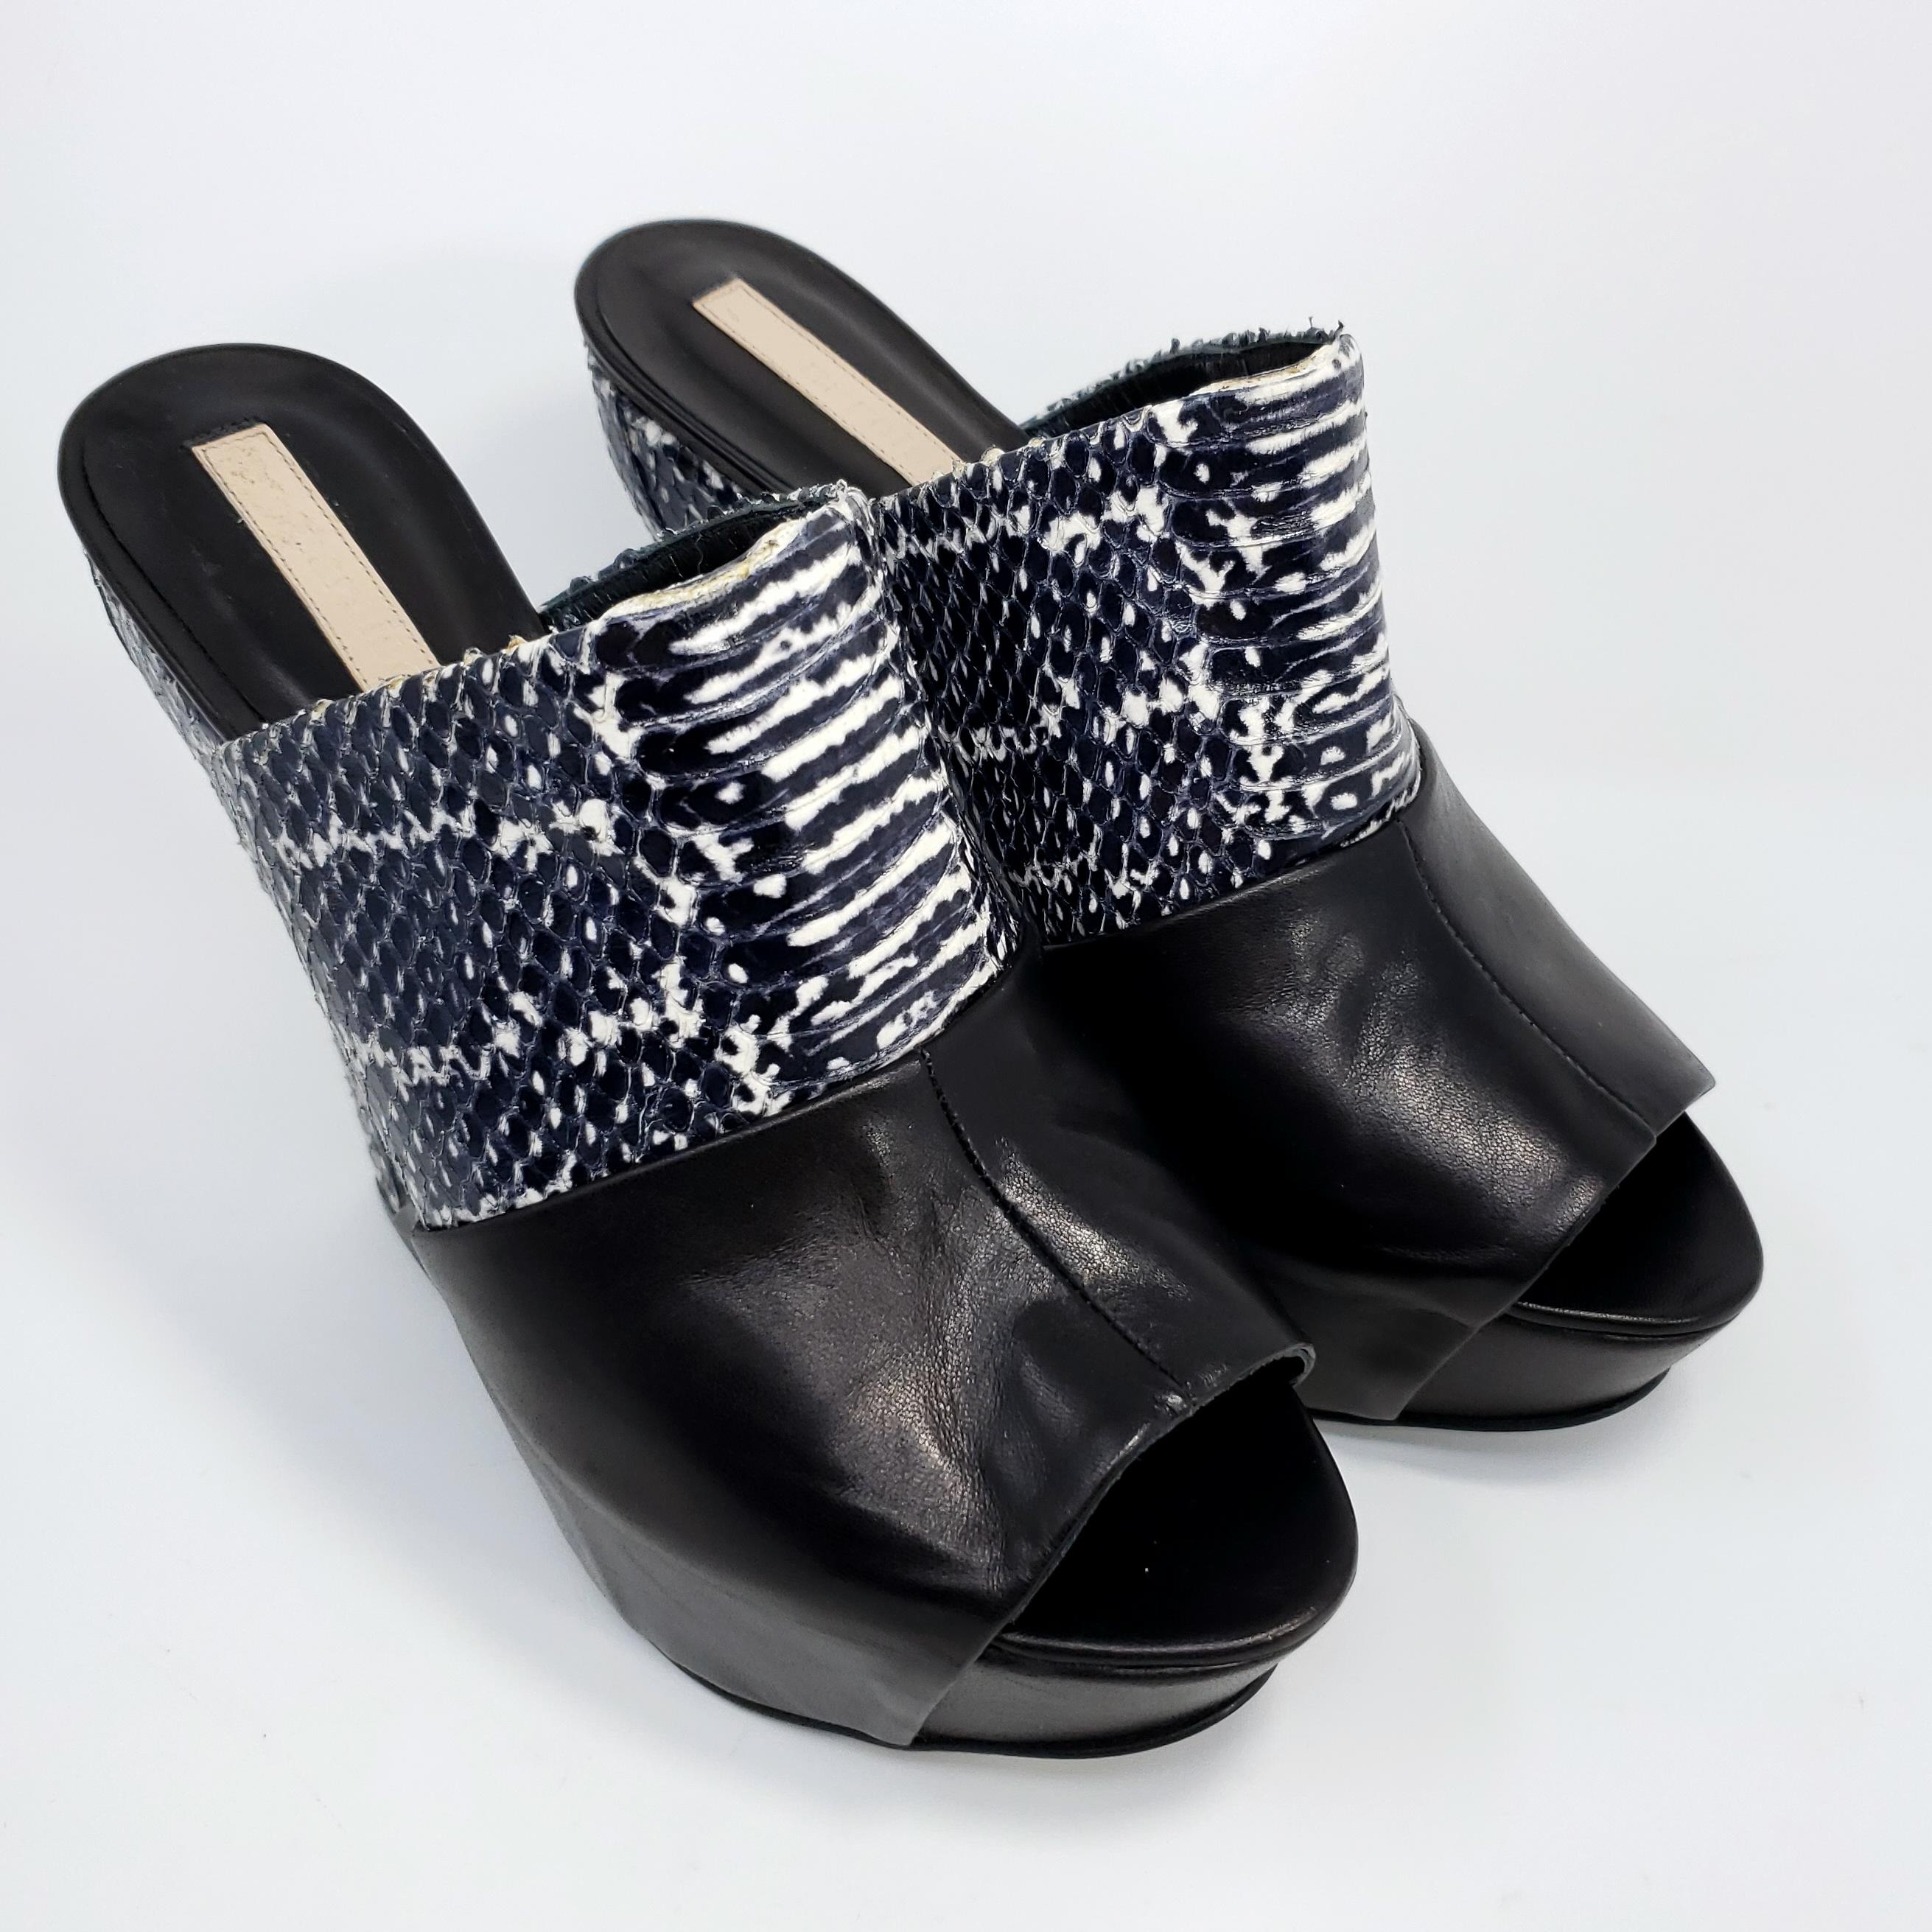  omen's wedge sandals by Narciso Rodriguez. This stylish shoe features black and white snakeskin and leather upper.

US 7.5, EU 37.5
Heel height: 5.5 in / 14 cm
Made in Italy

Good condition with gentle, minimal wear. Comes with original box and